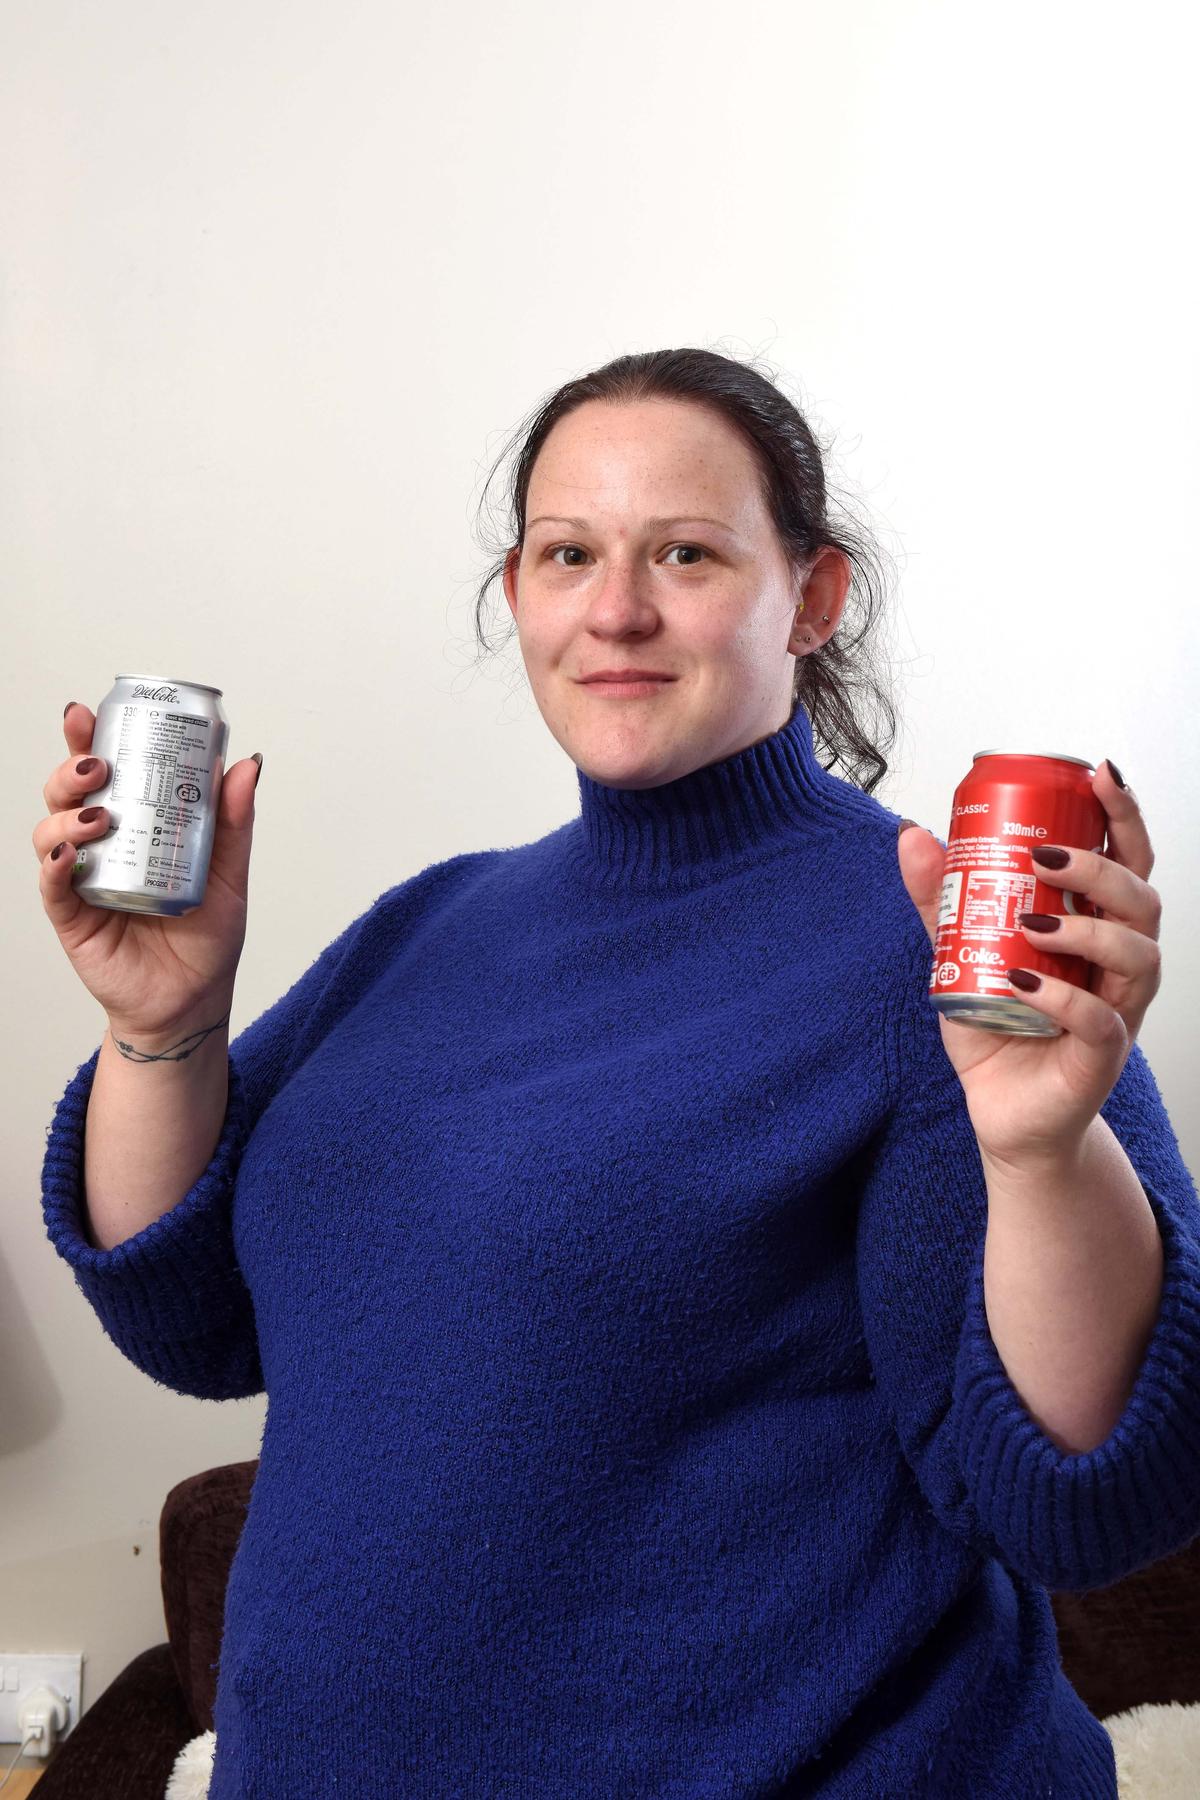 Elizabeth Perkins with two cans: one of diet cola, which she is allergic to, and one of regular cola, which she can have. (Caters News)